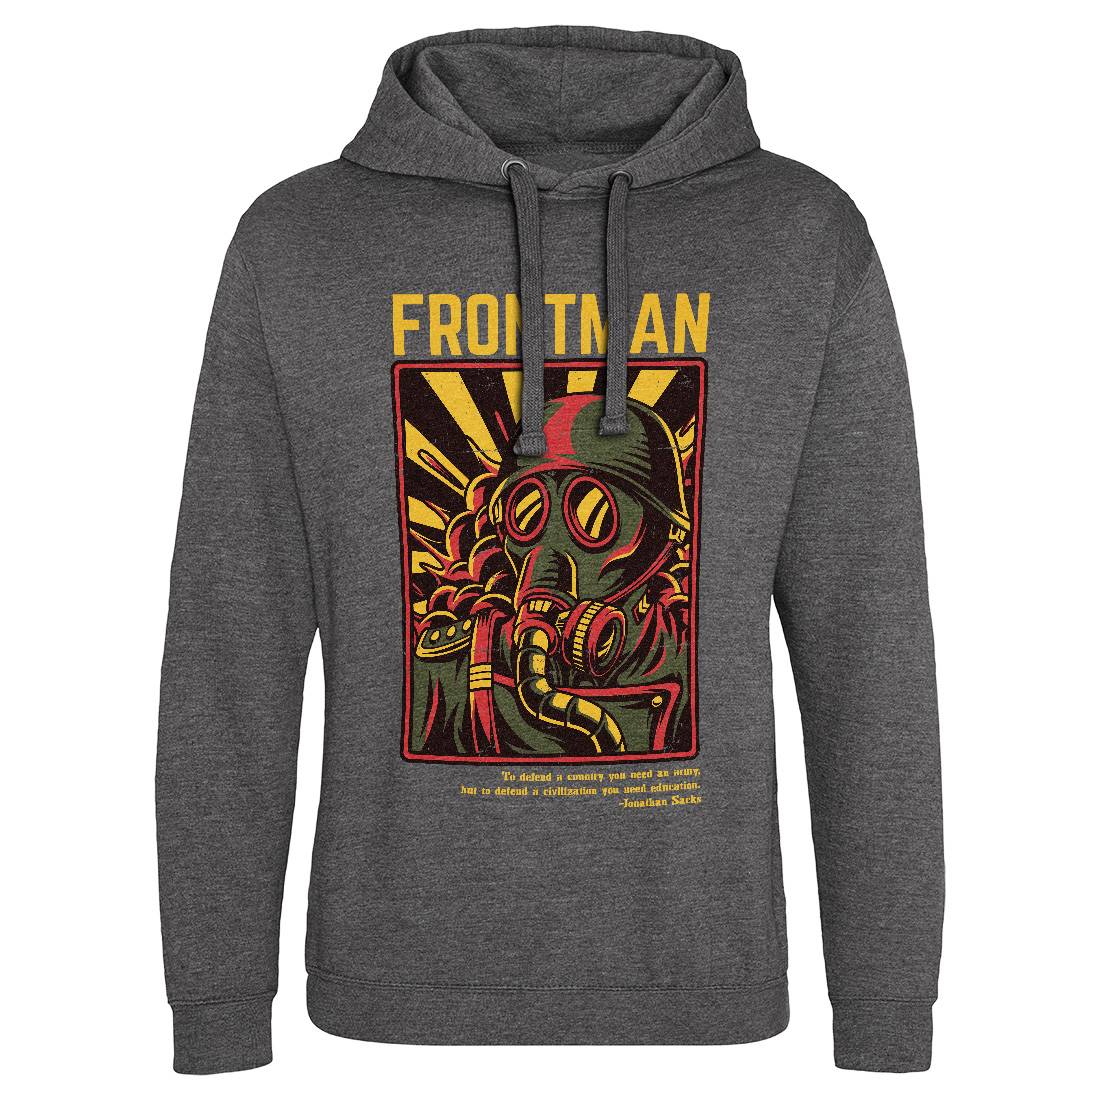 Frontman Mens Hoodie Without Pocket Army D781